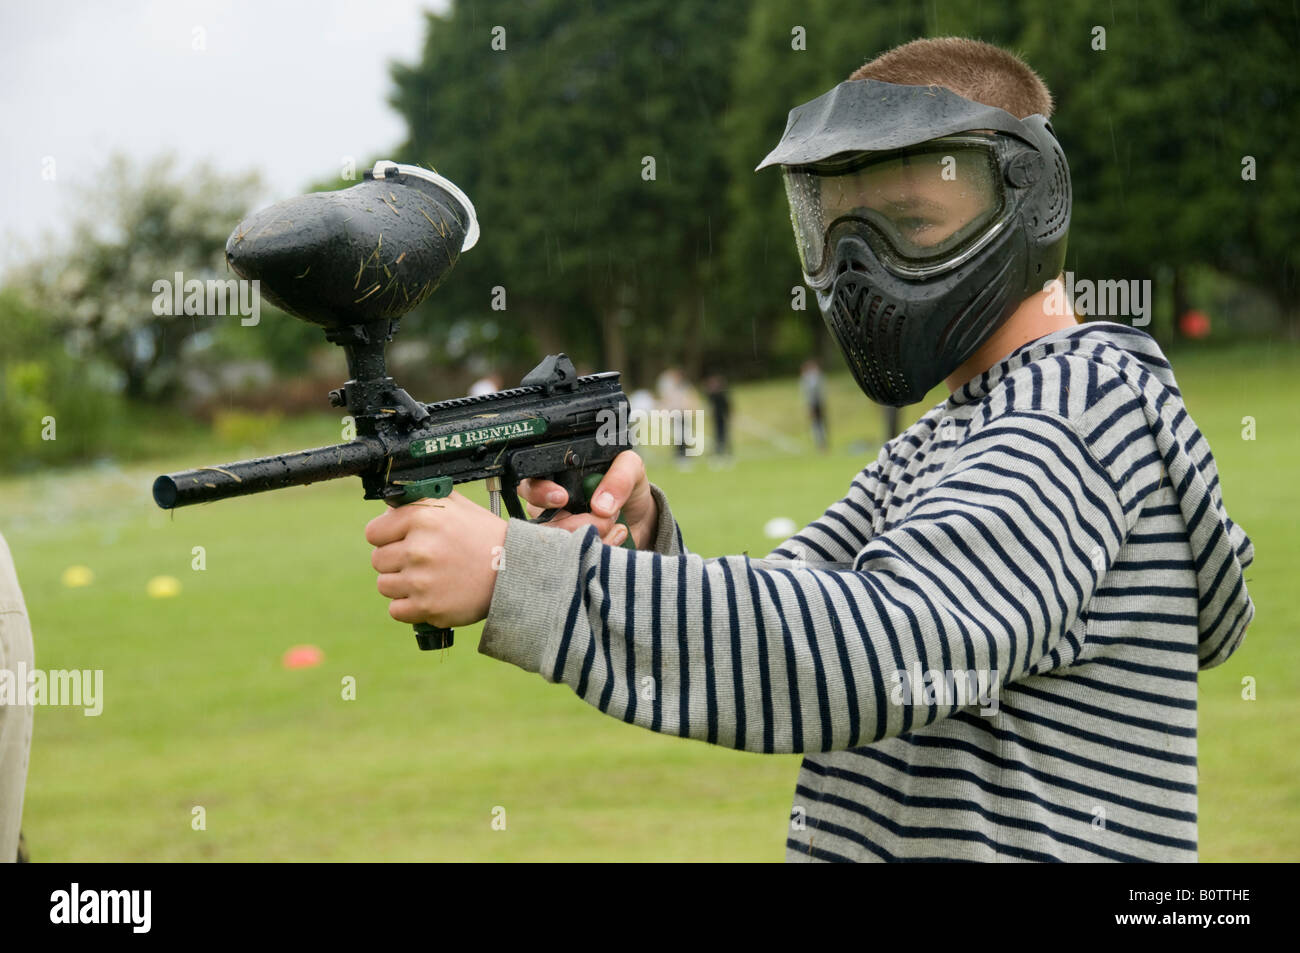 Paintball Gun, Paintball Equipment Stock Photo, Picture and